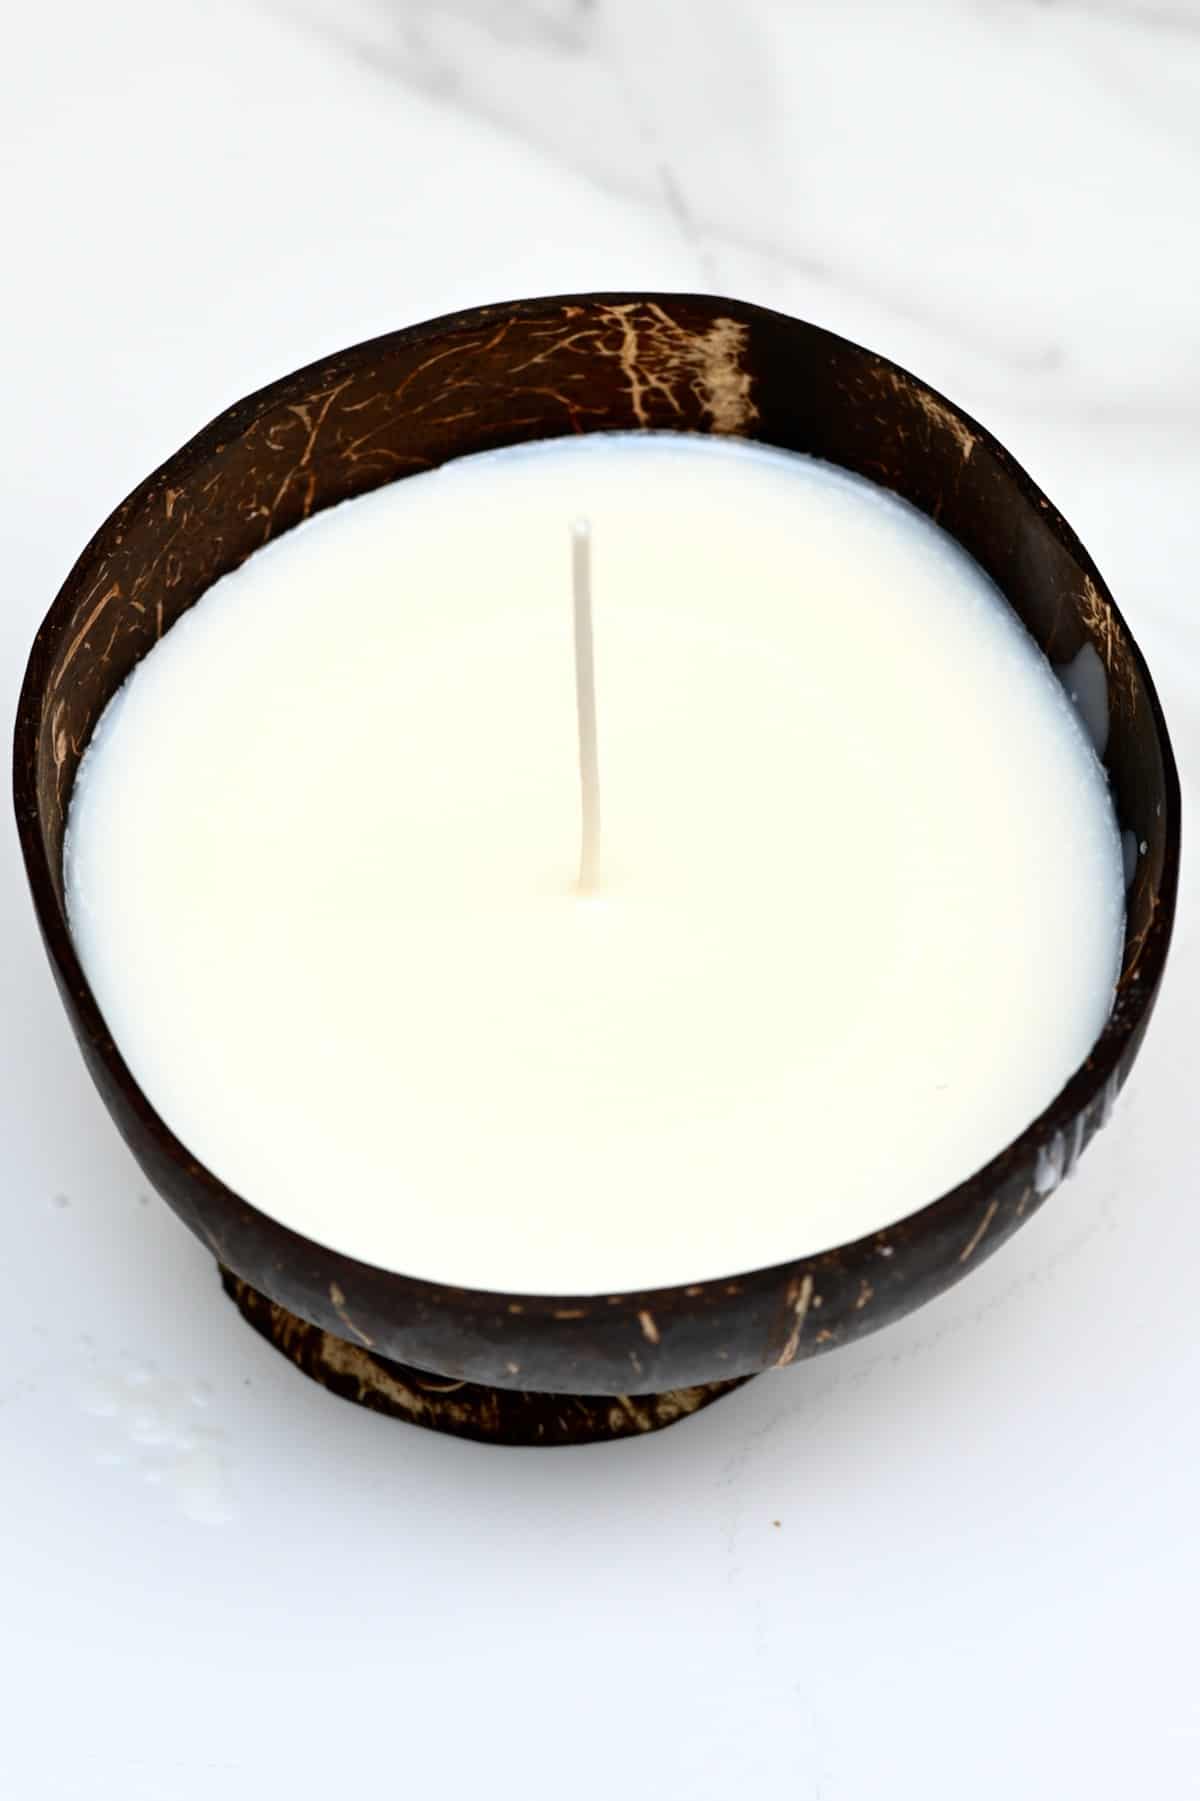 Soy Candles vs. Beeswax Candles - Reuse Grow Enjoy